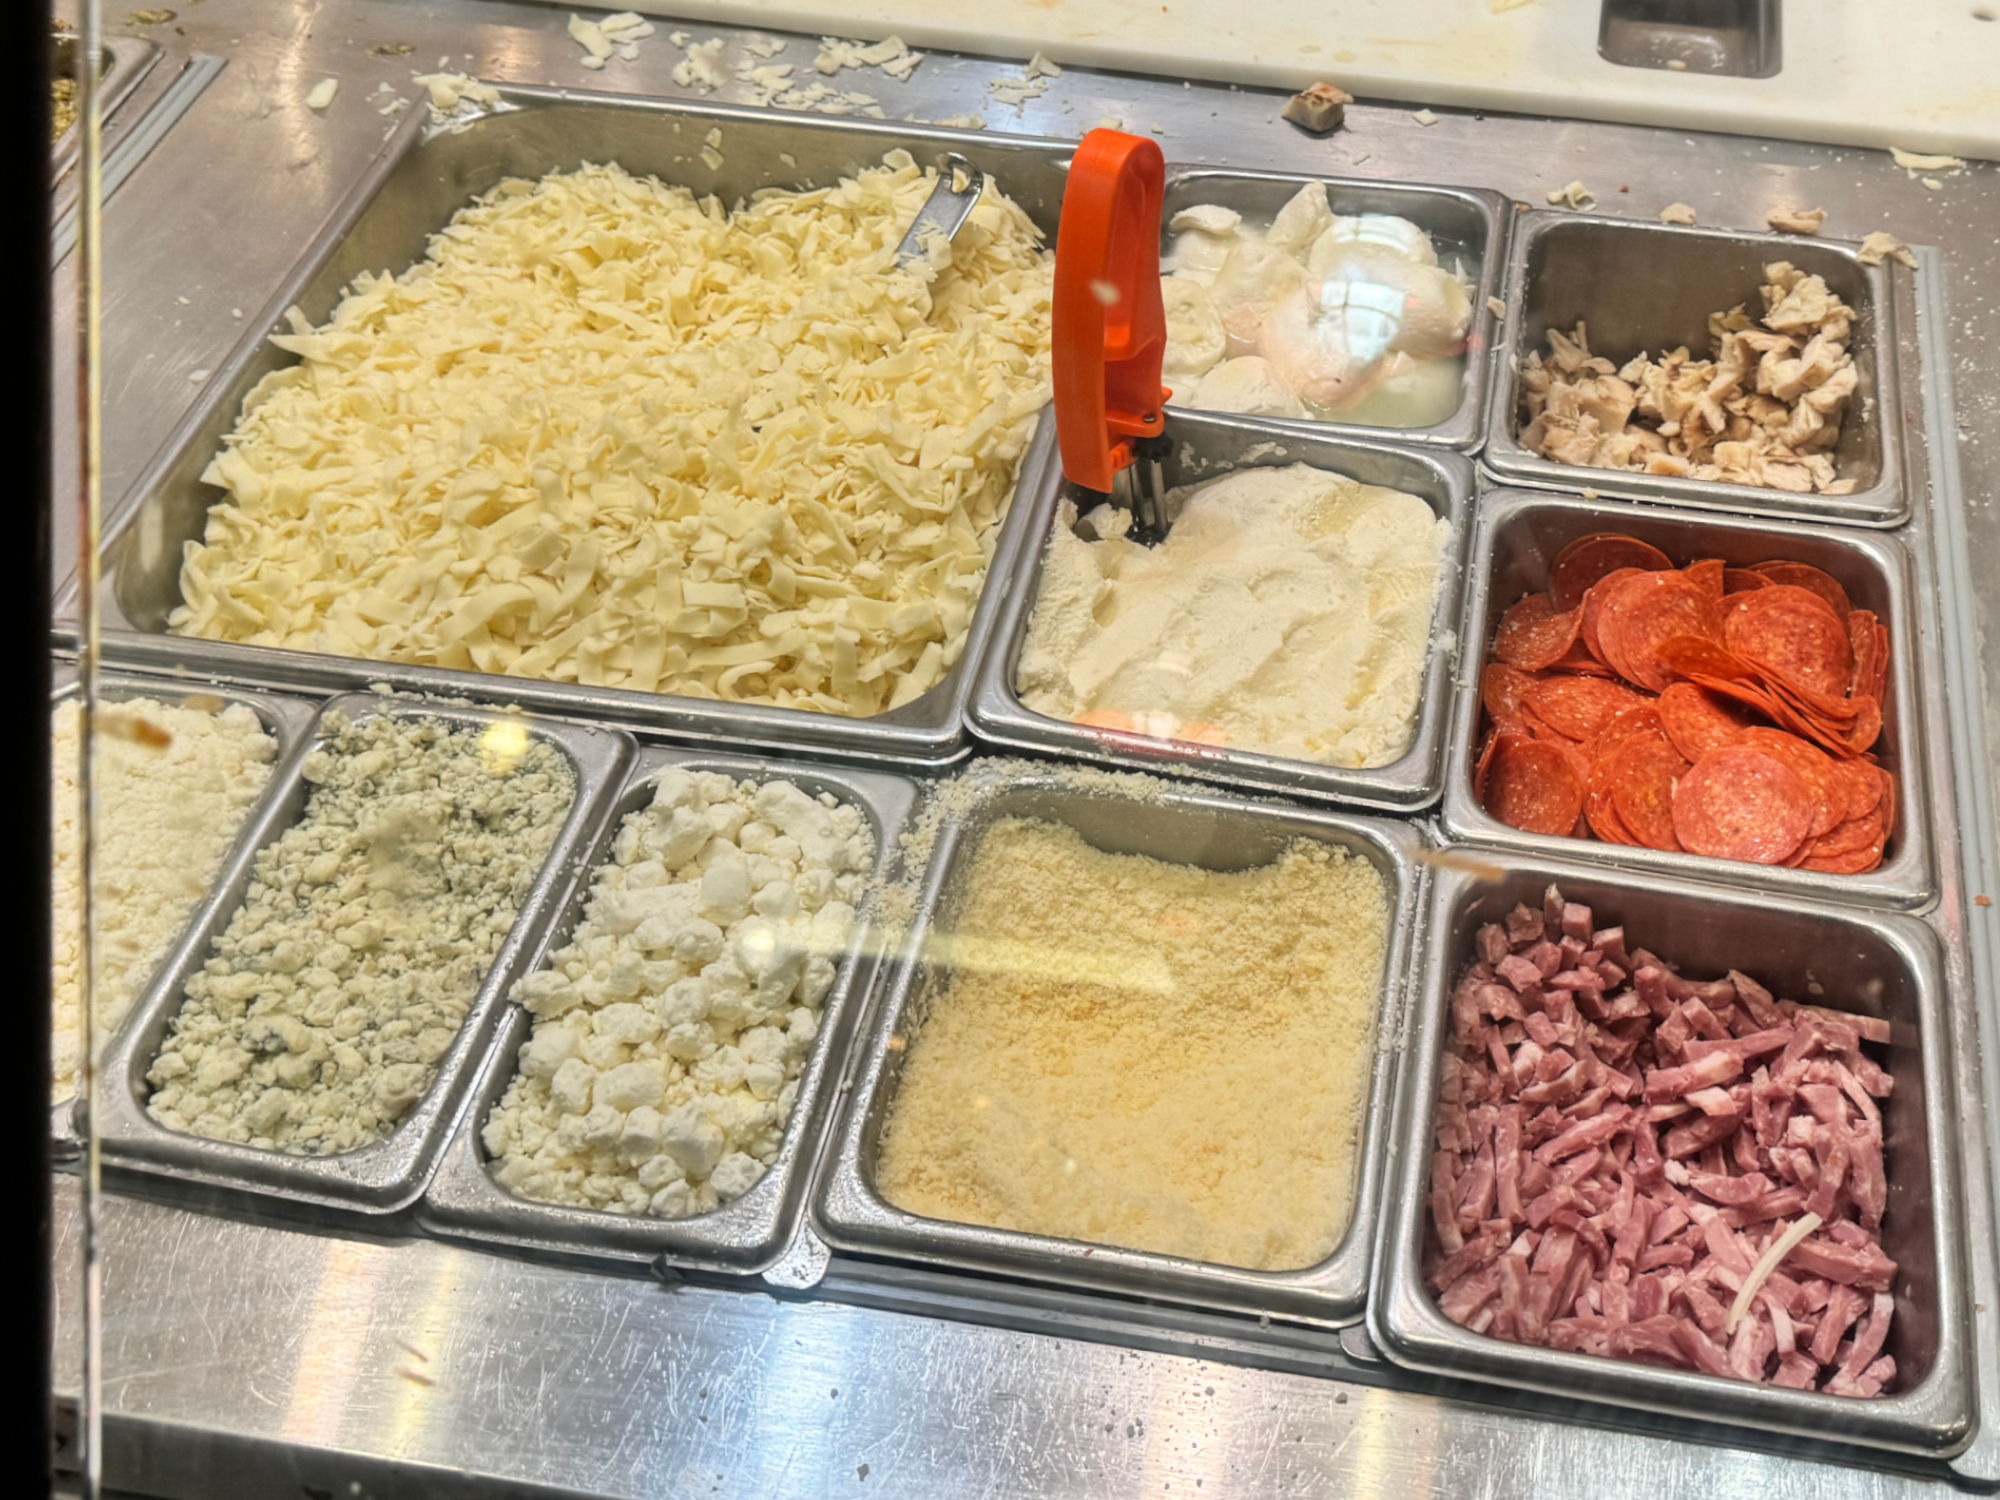 Blaze Pizza Cheese and Meat Section